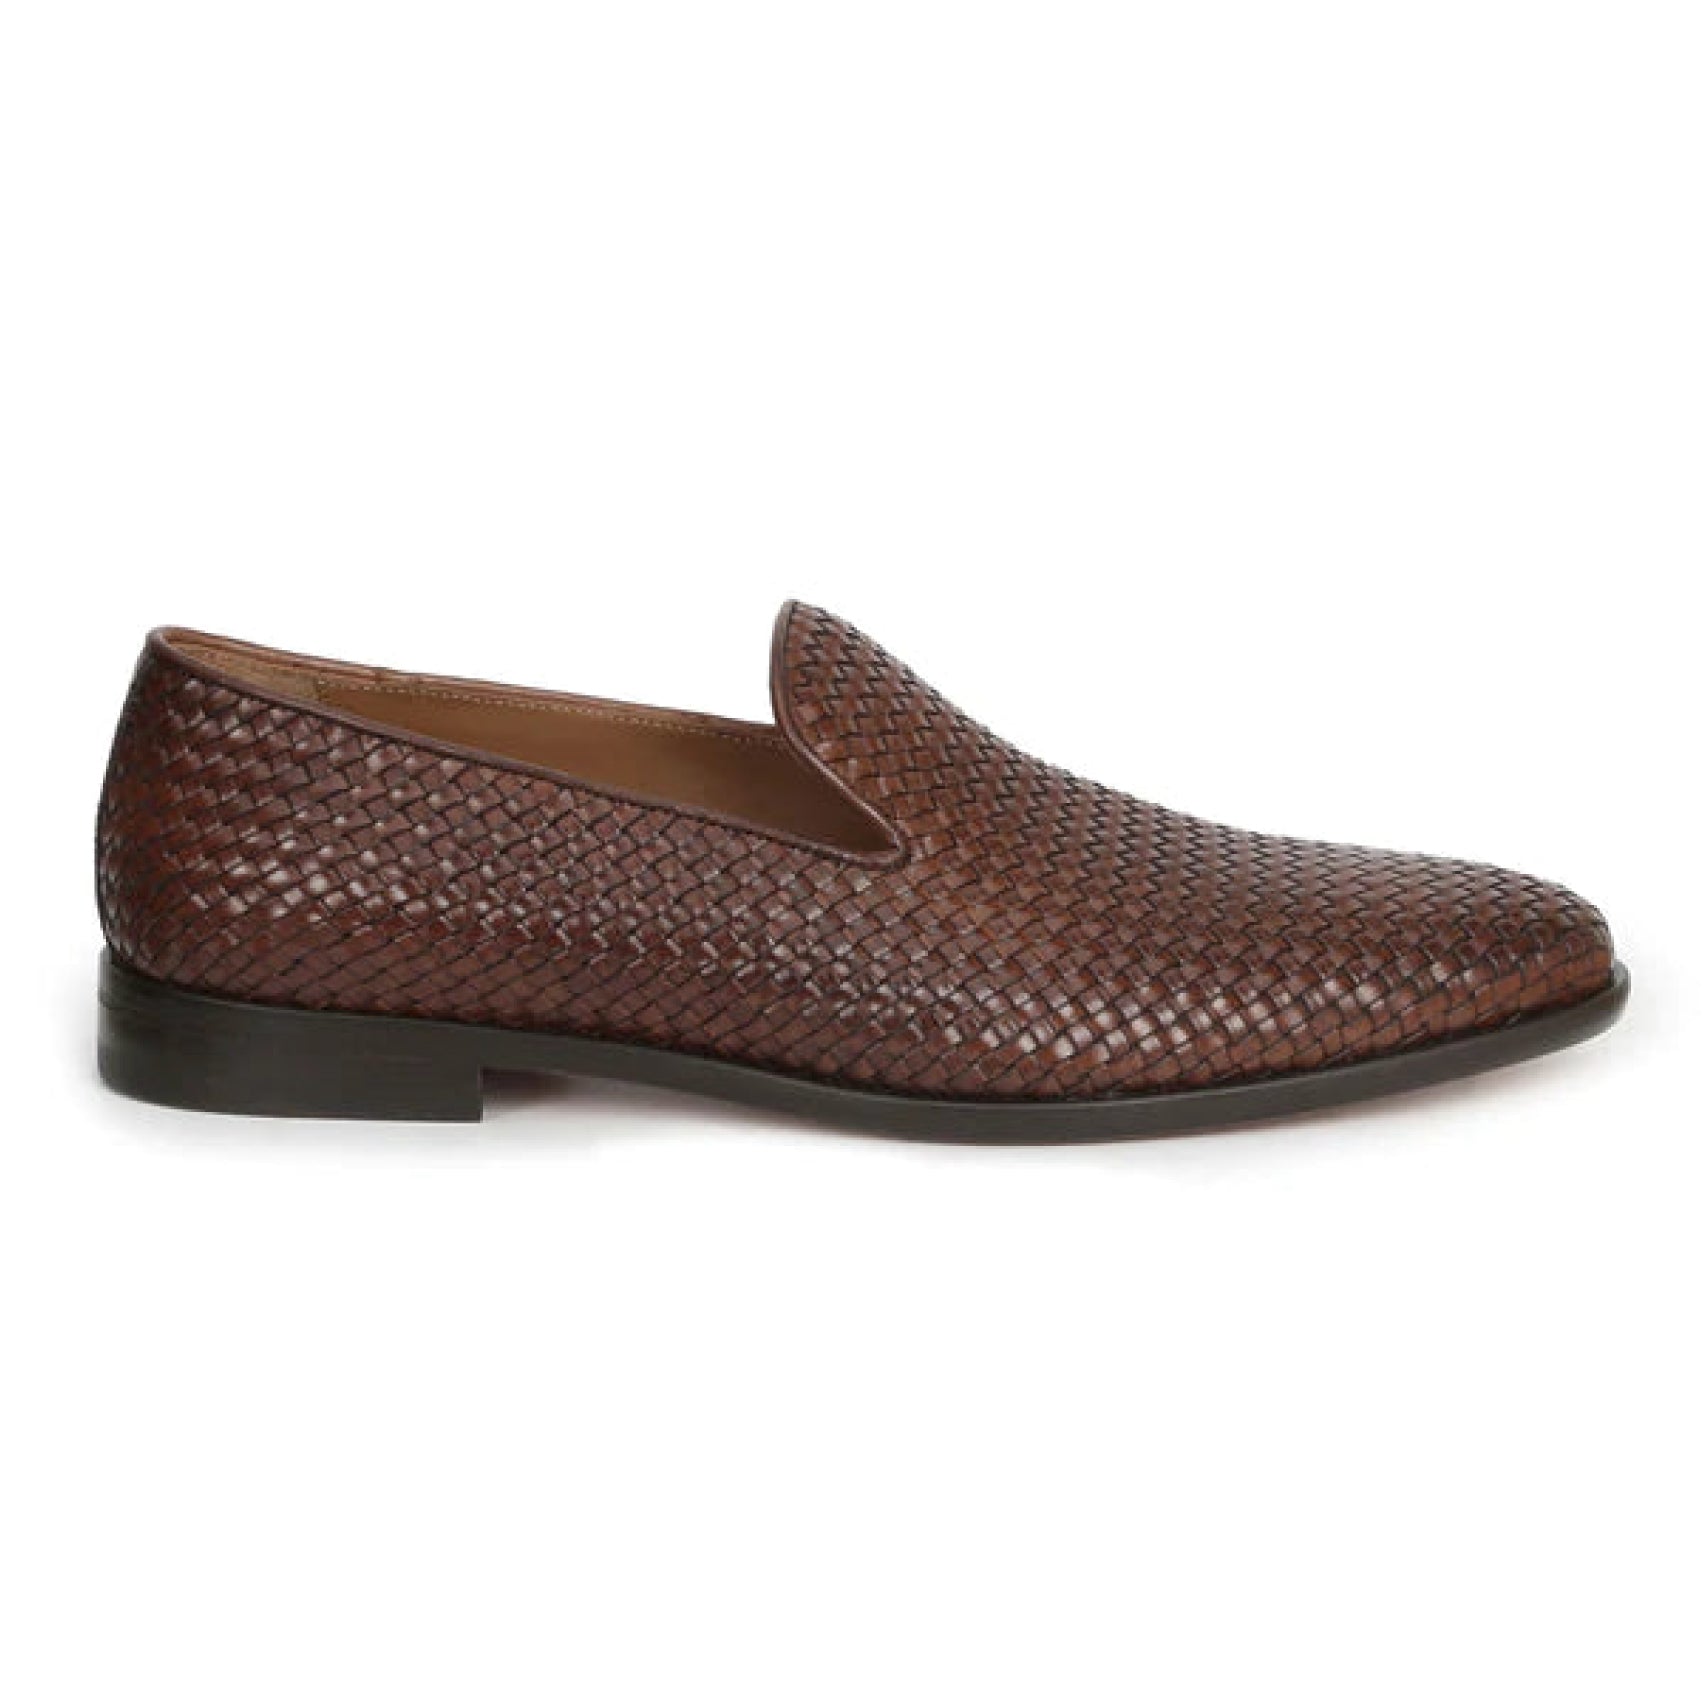 Brown Leather Italian Loafer